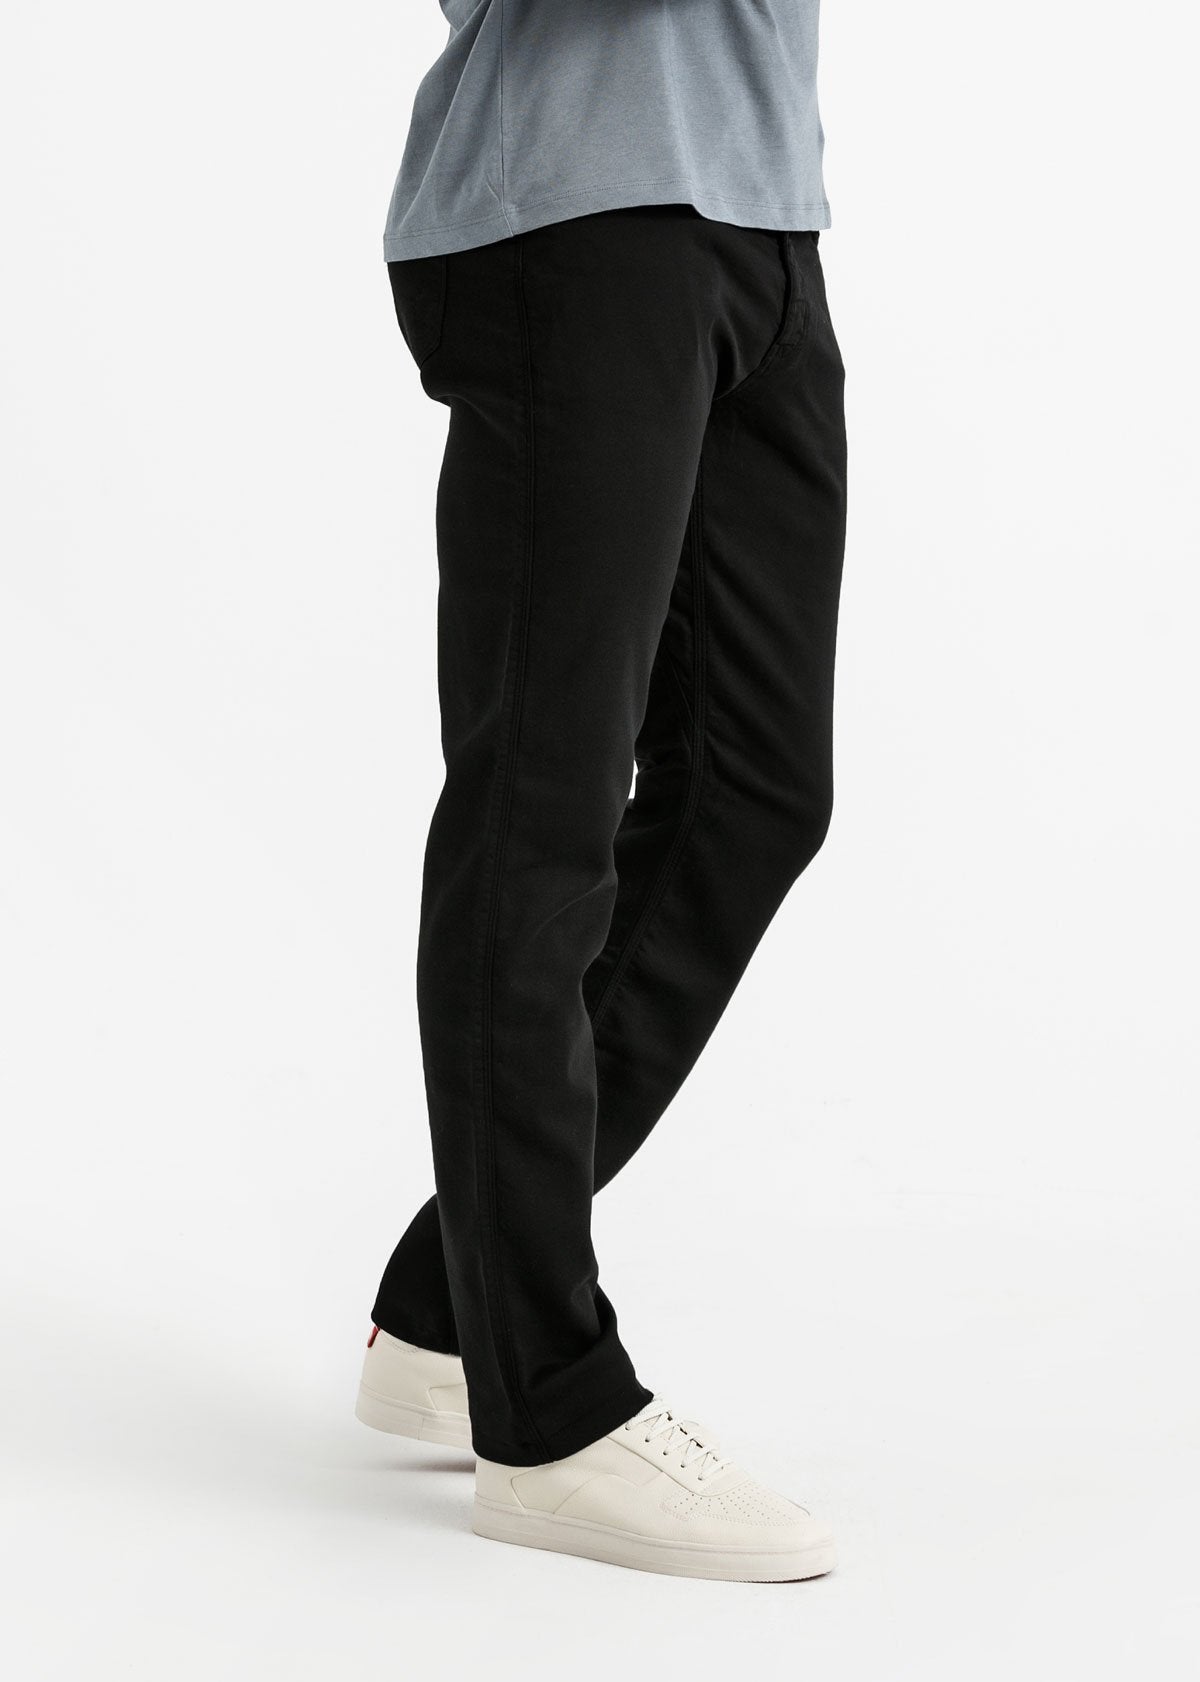 Tapered Straight Sweatpants for Men